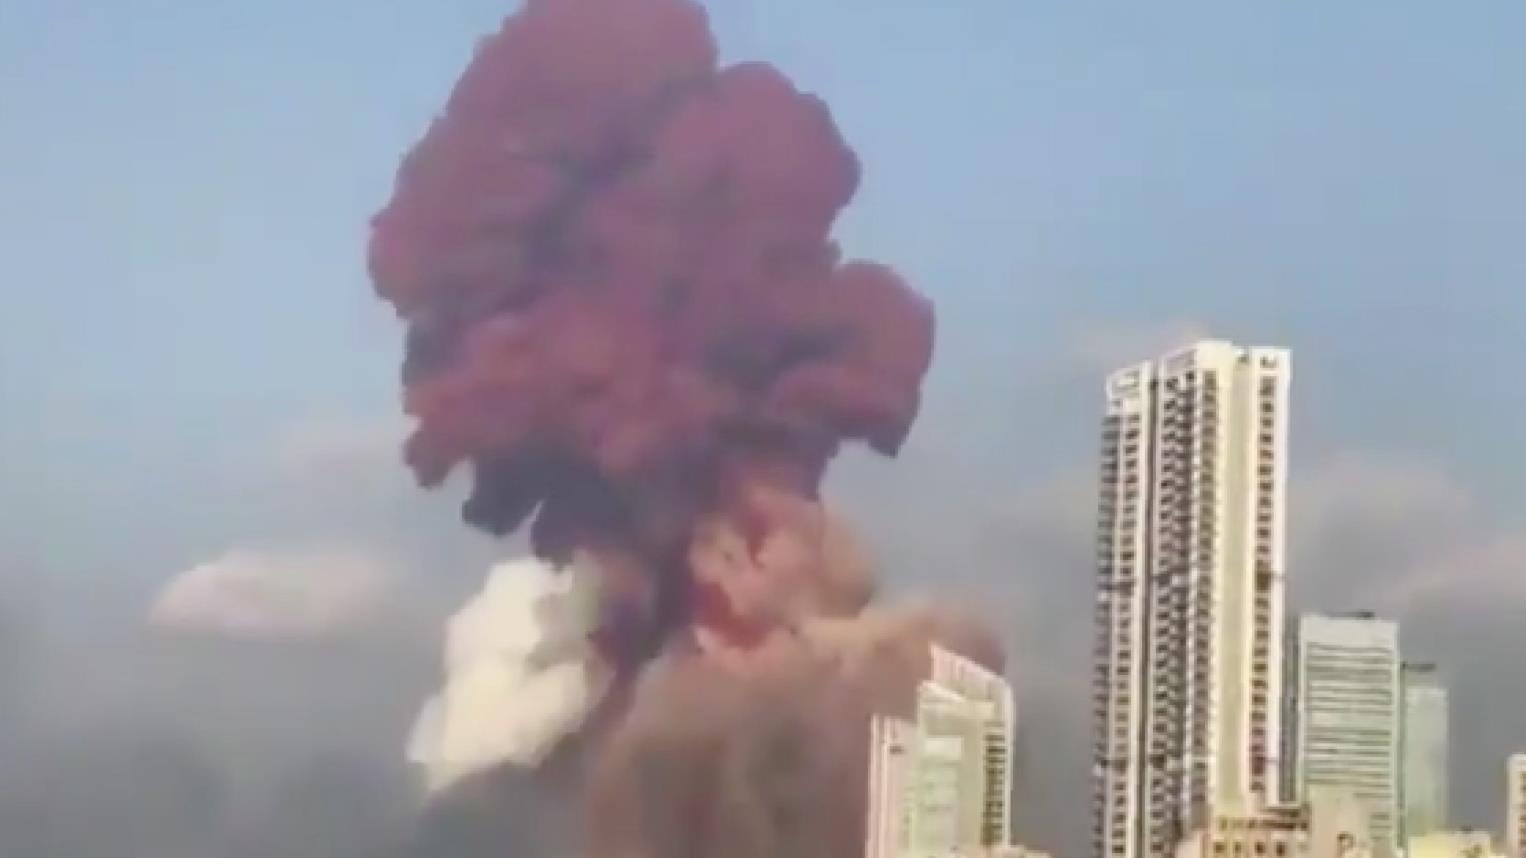 Massive explosions reported in Beirut, Lebanon